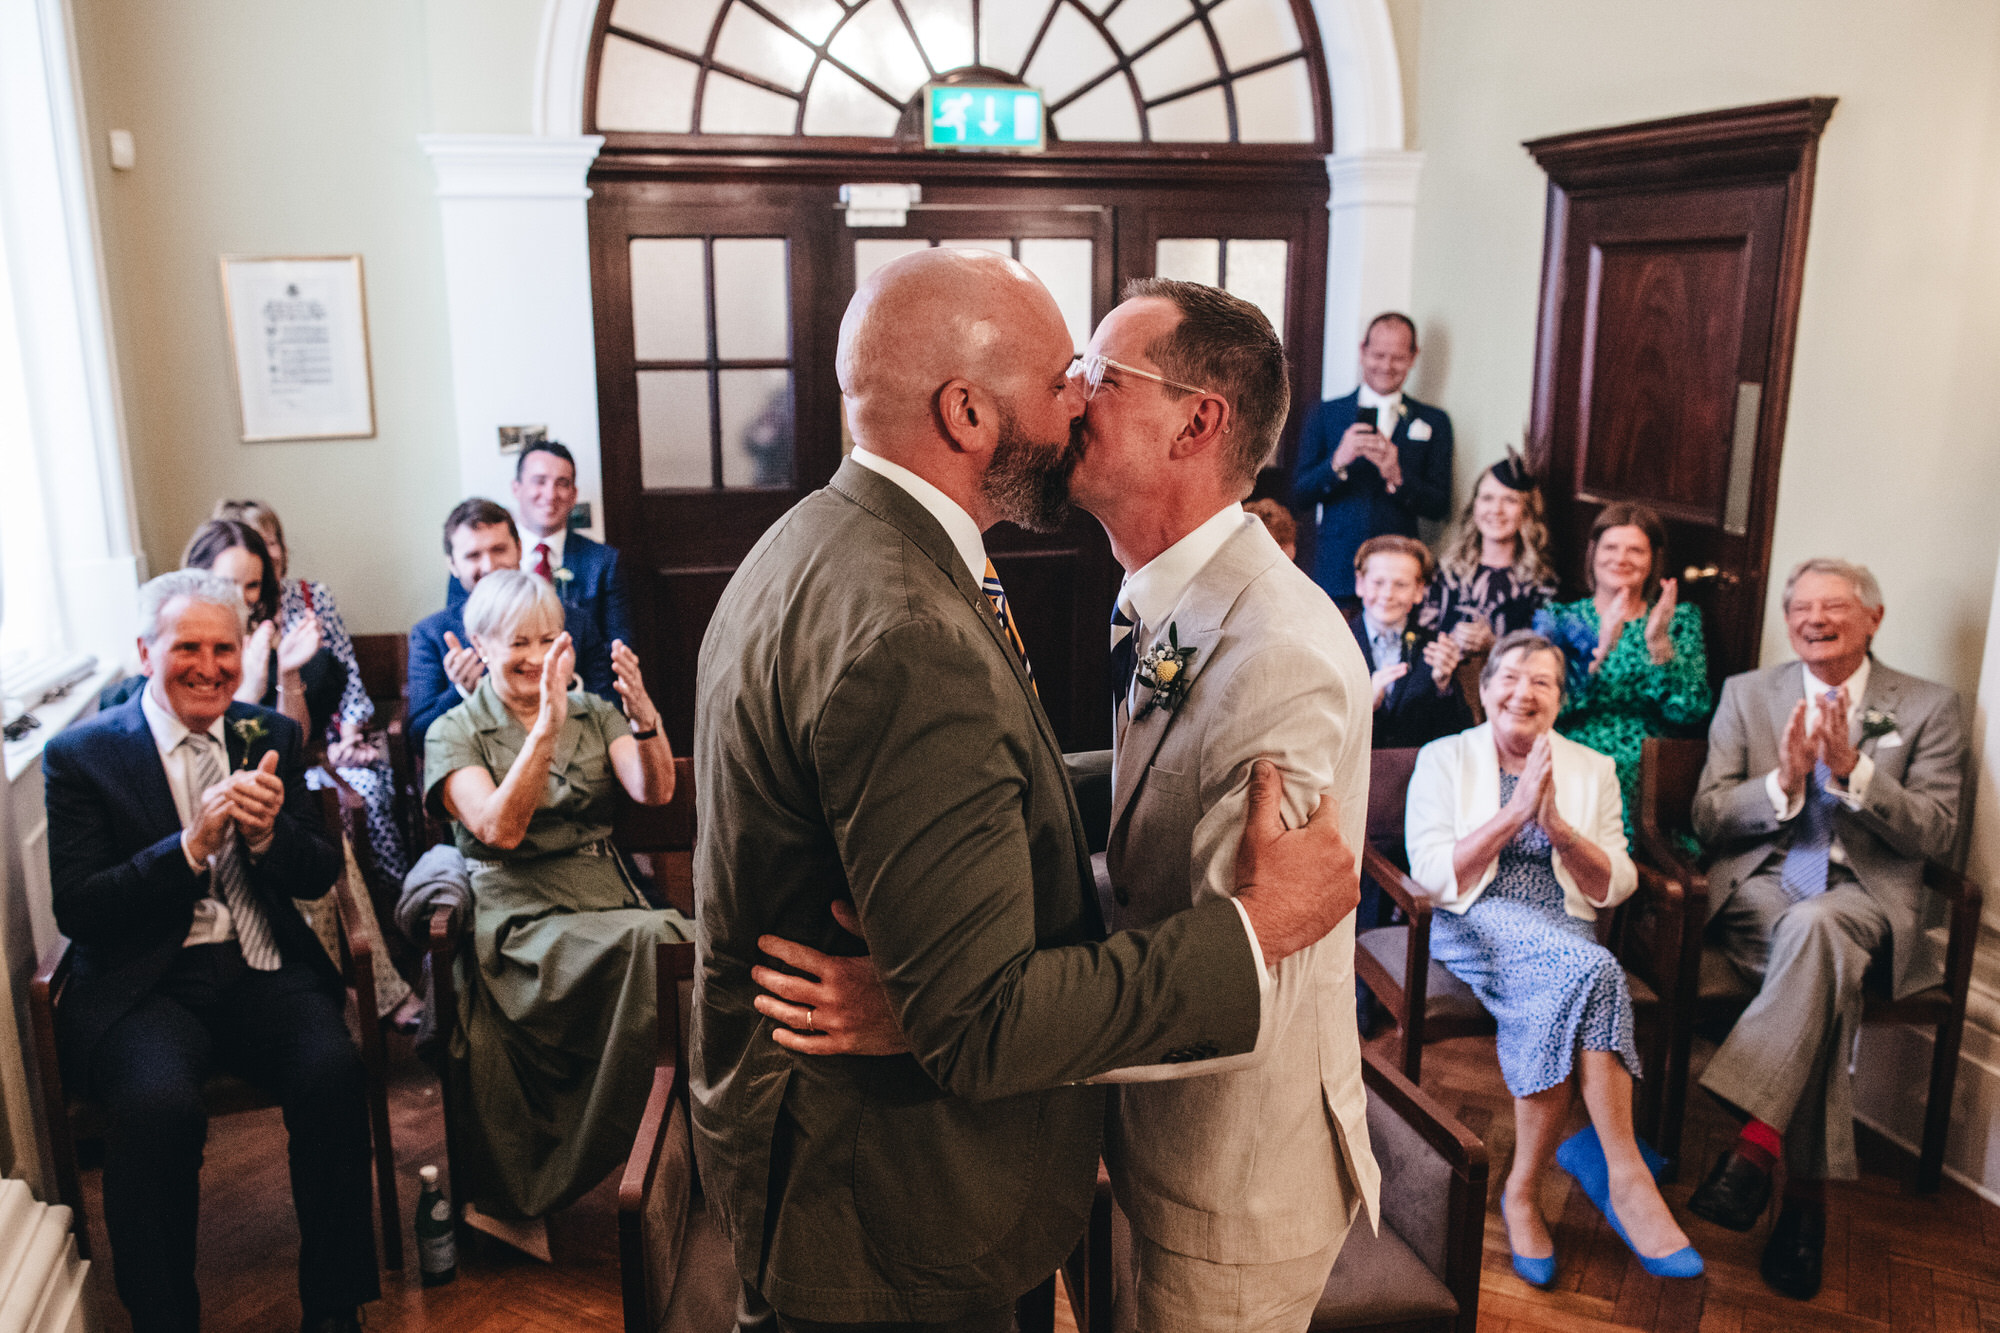 grooms kiss at Chelsea Old Town wedding with guests applauding at ceremony